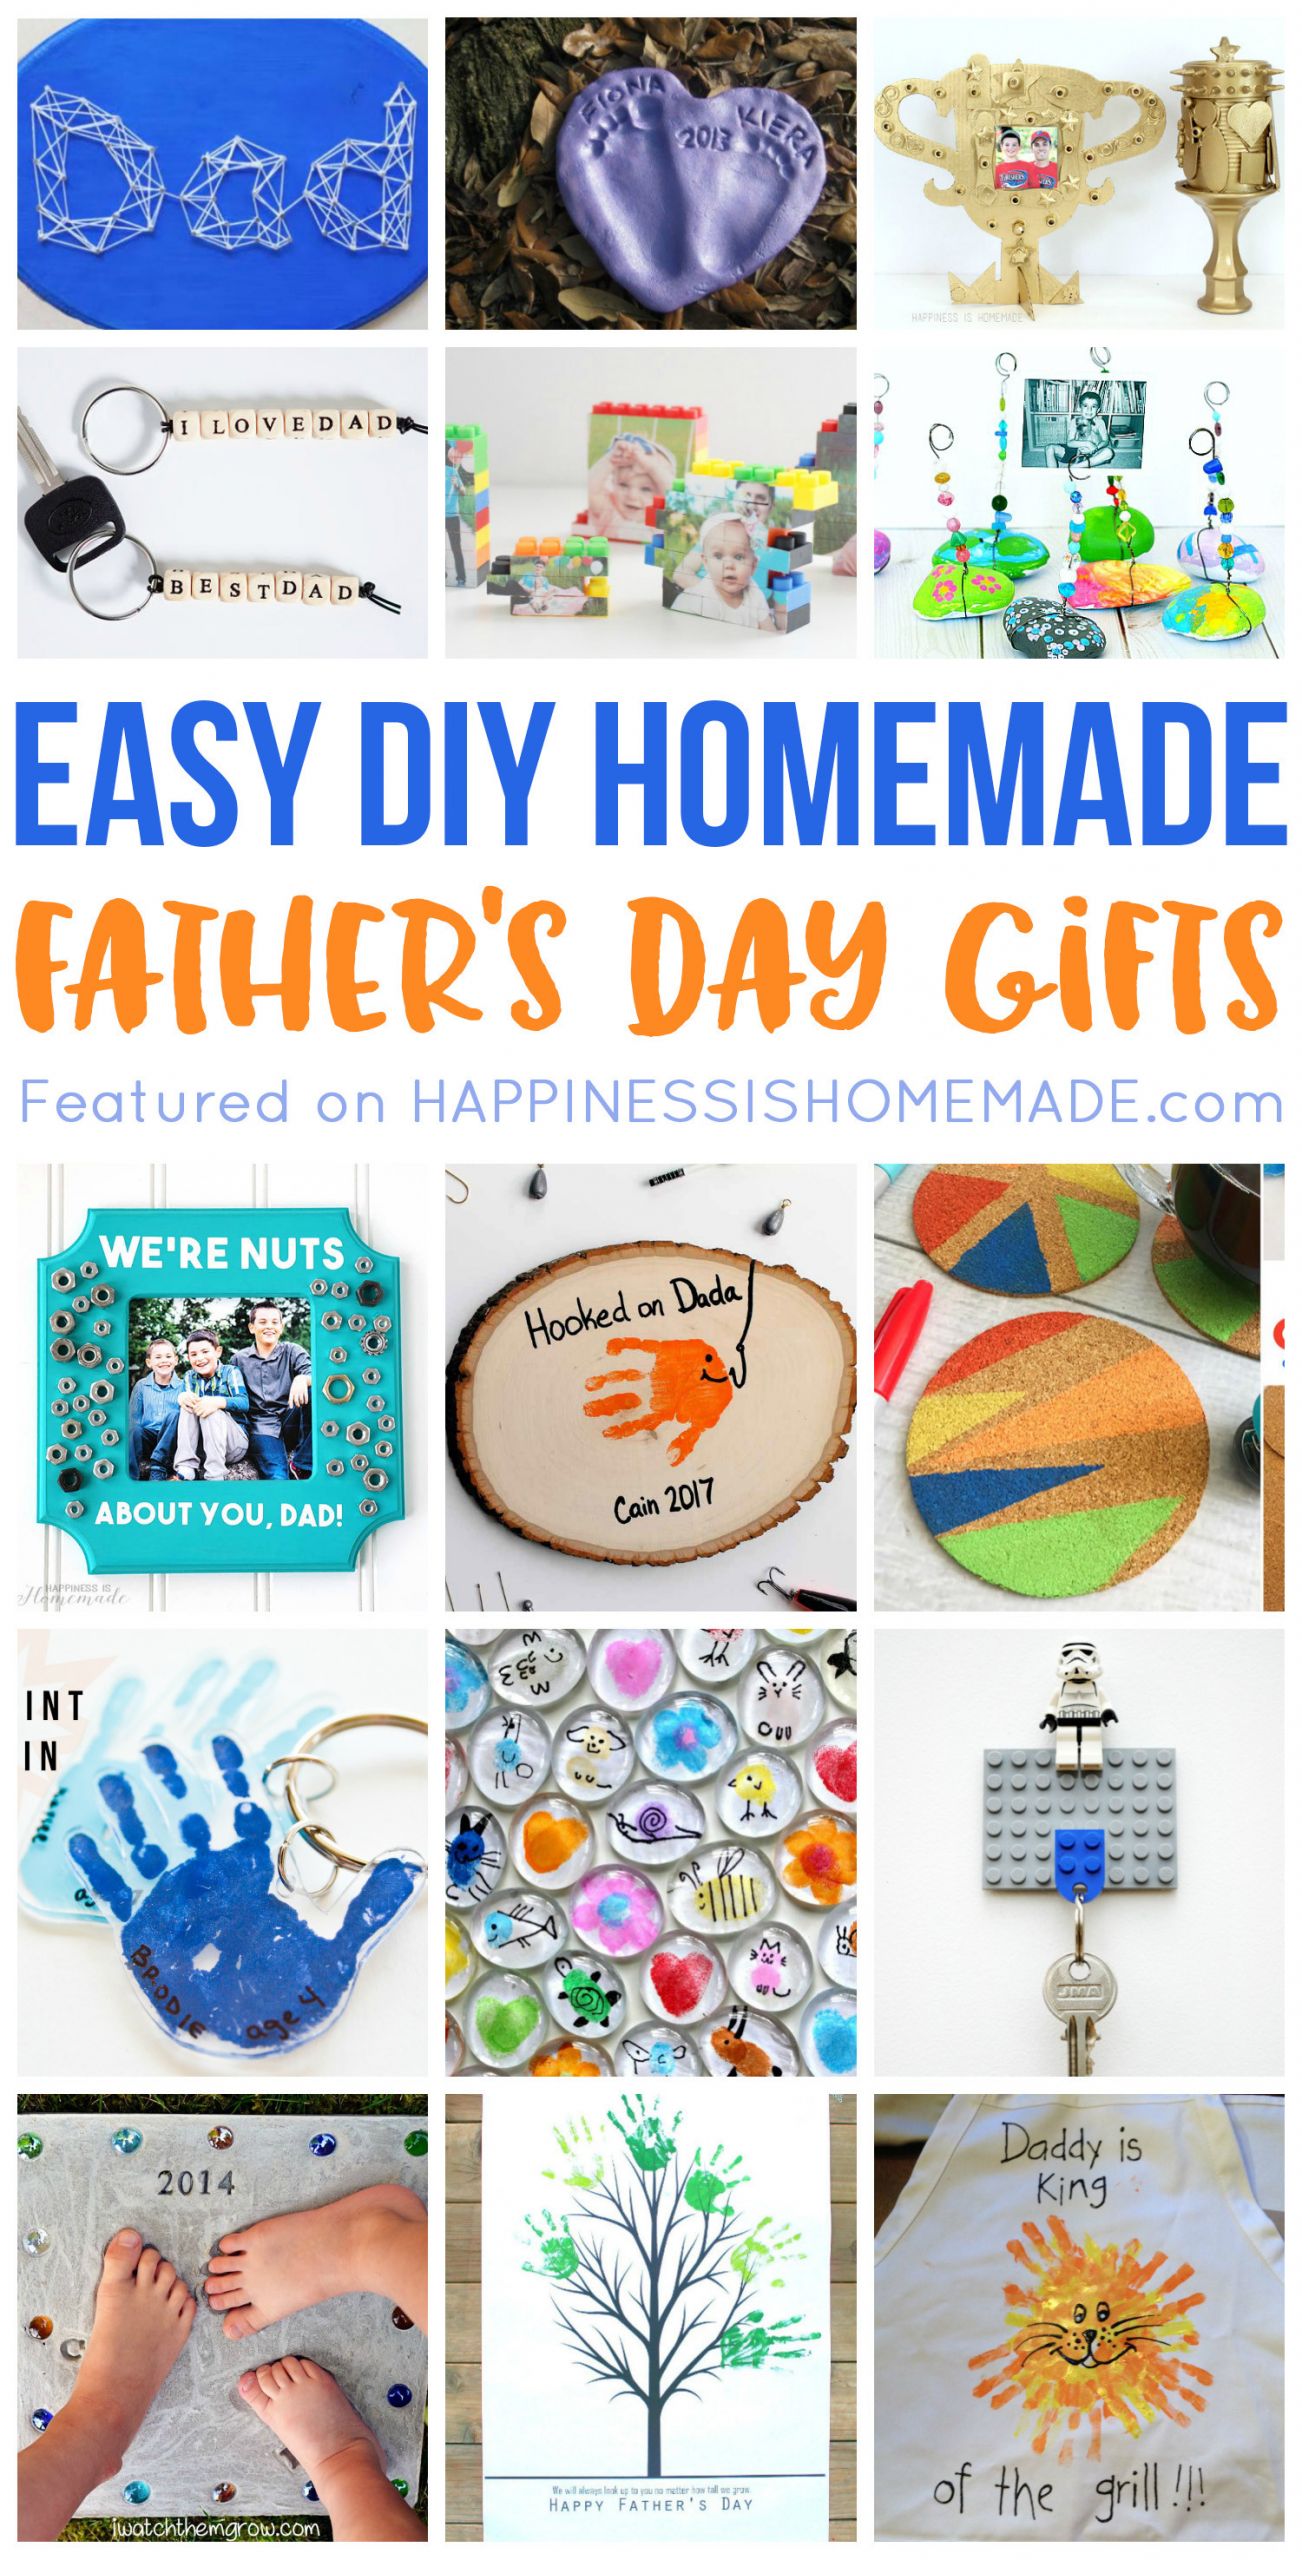 DIY Gifts For Fathers Day
 20 Homemade Father s Day Gifts That Kids Can Make